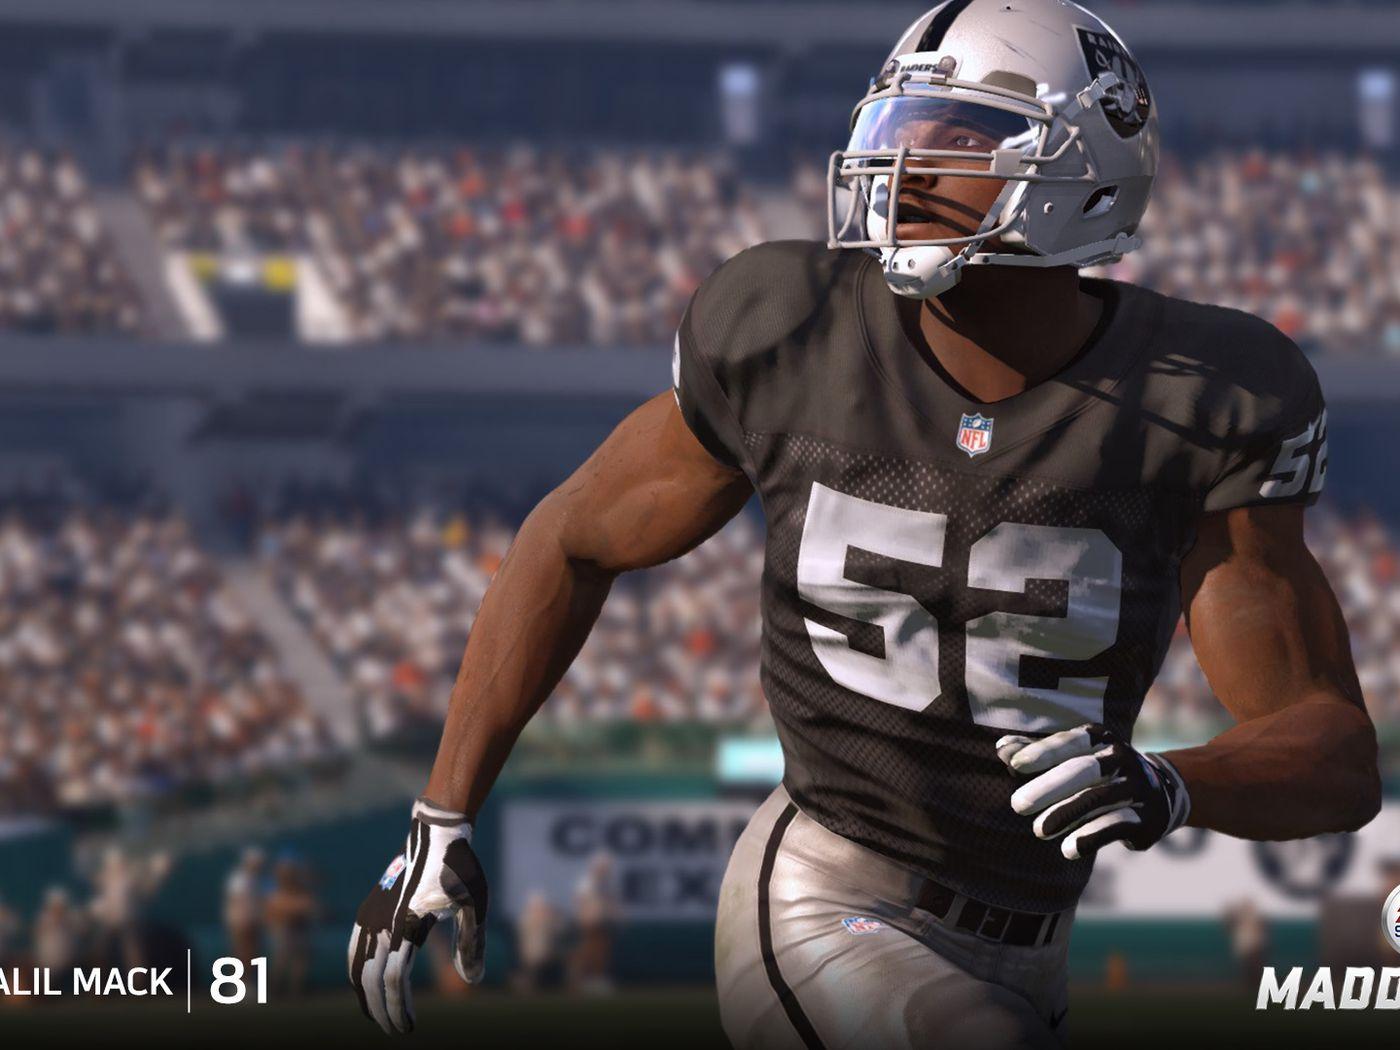 Khalil Mack, rookies Madden 2015 ratings released HINT: It's better